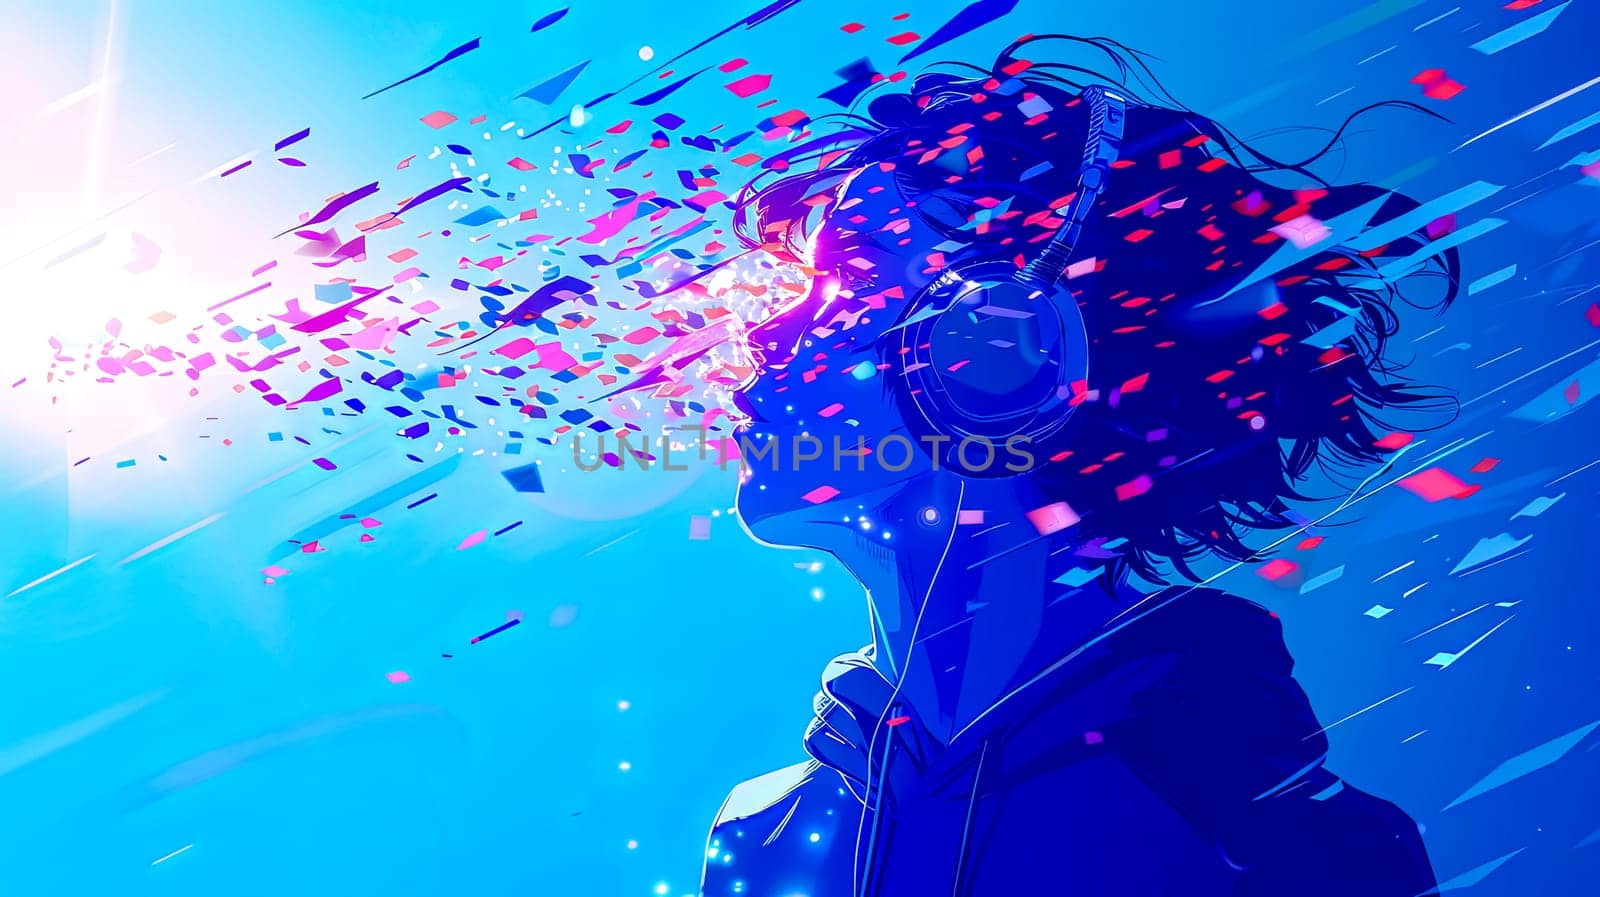 Vibrant illustration of a person with headphones experiencing a burst of colorful notes